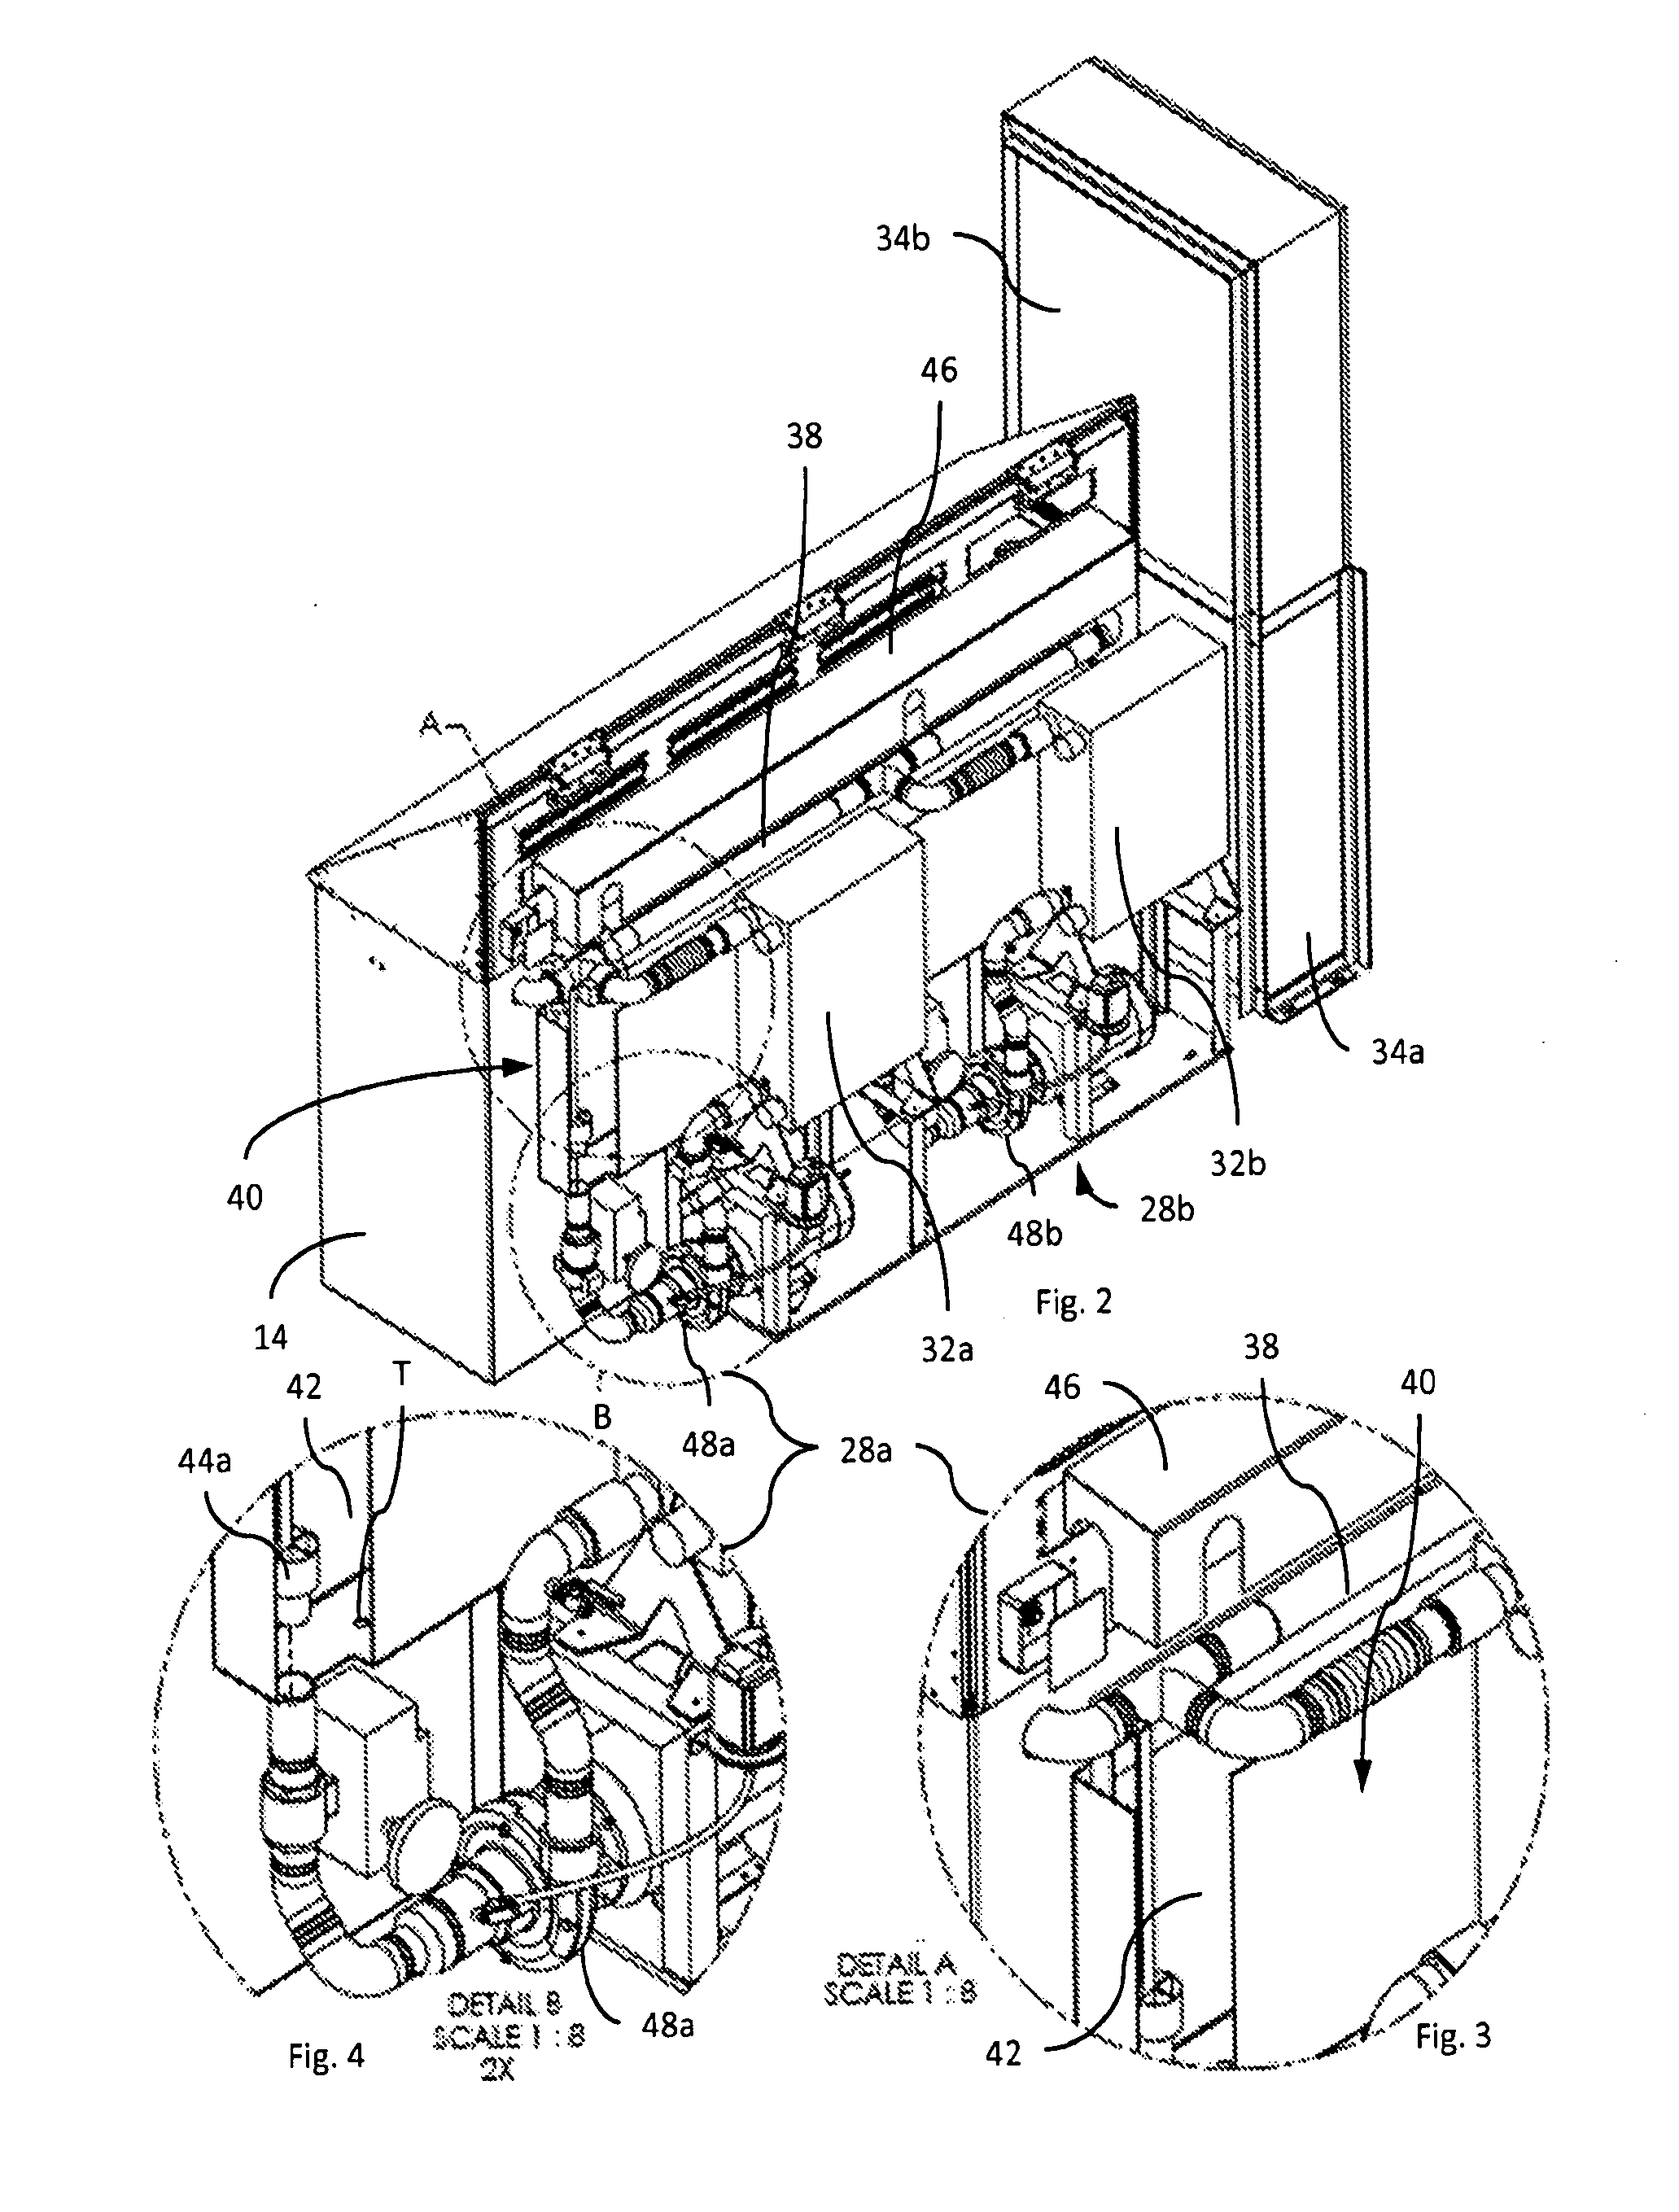 Appliance Immersion Cooling System